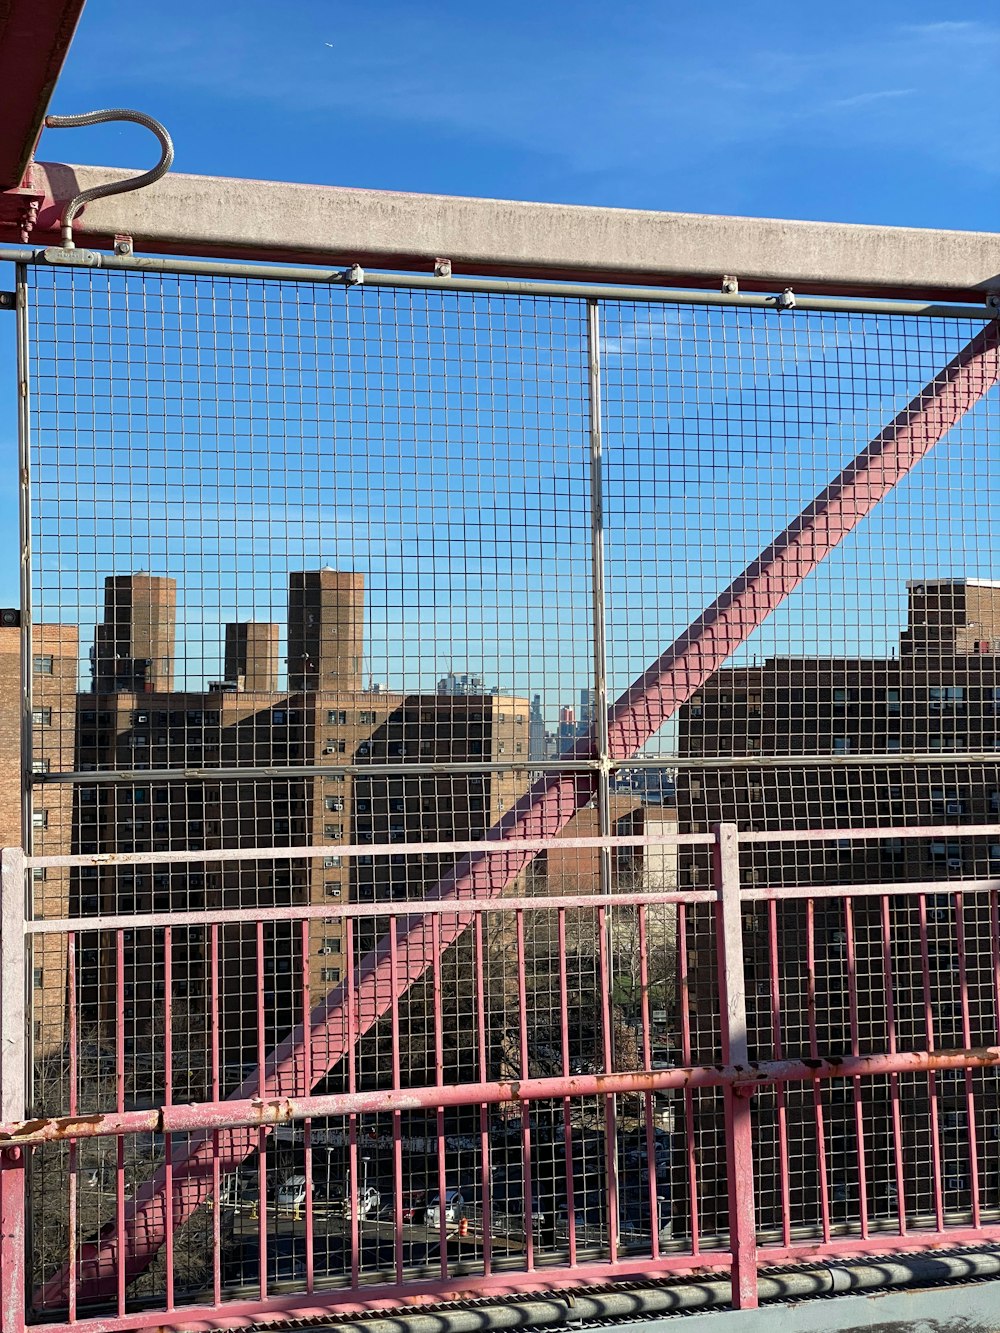 a view of a city through a fence